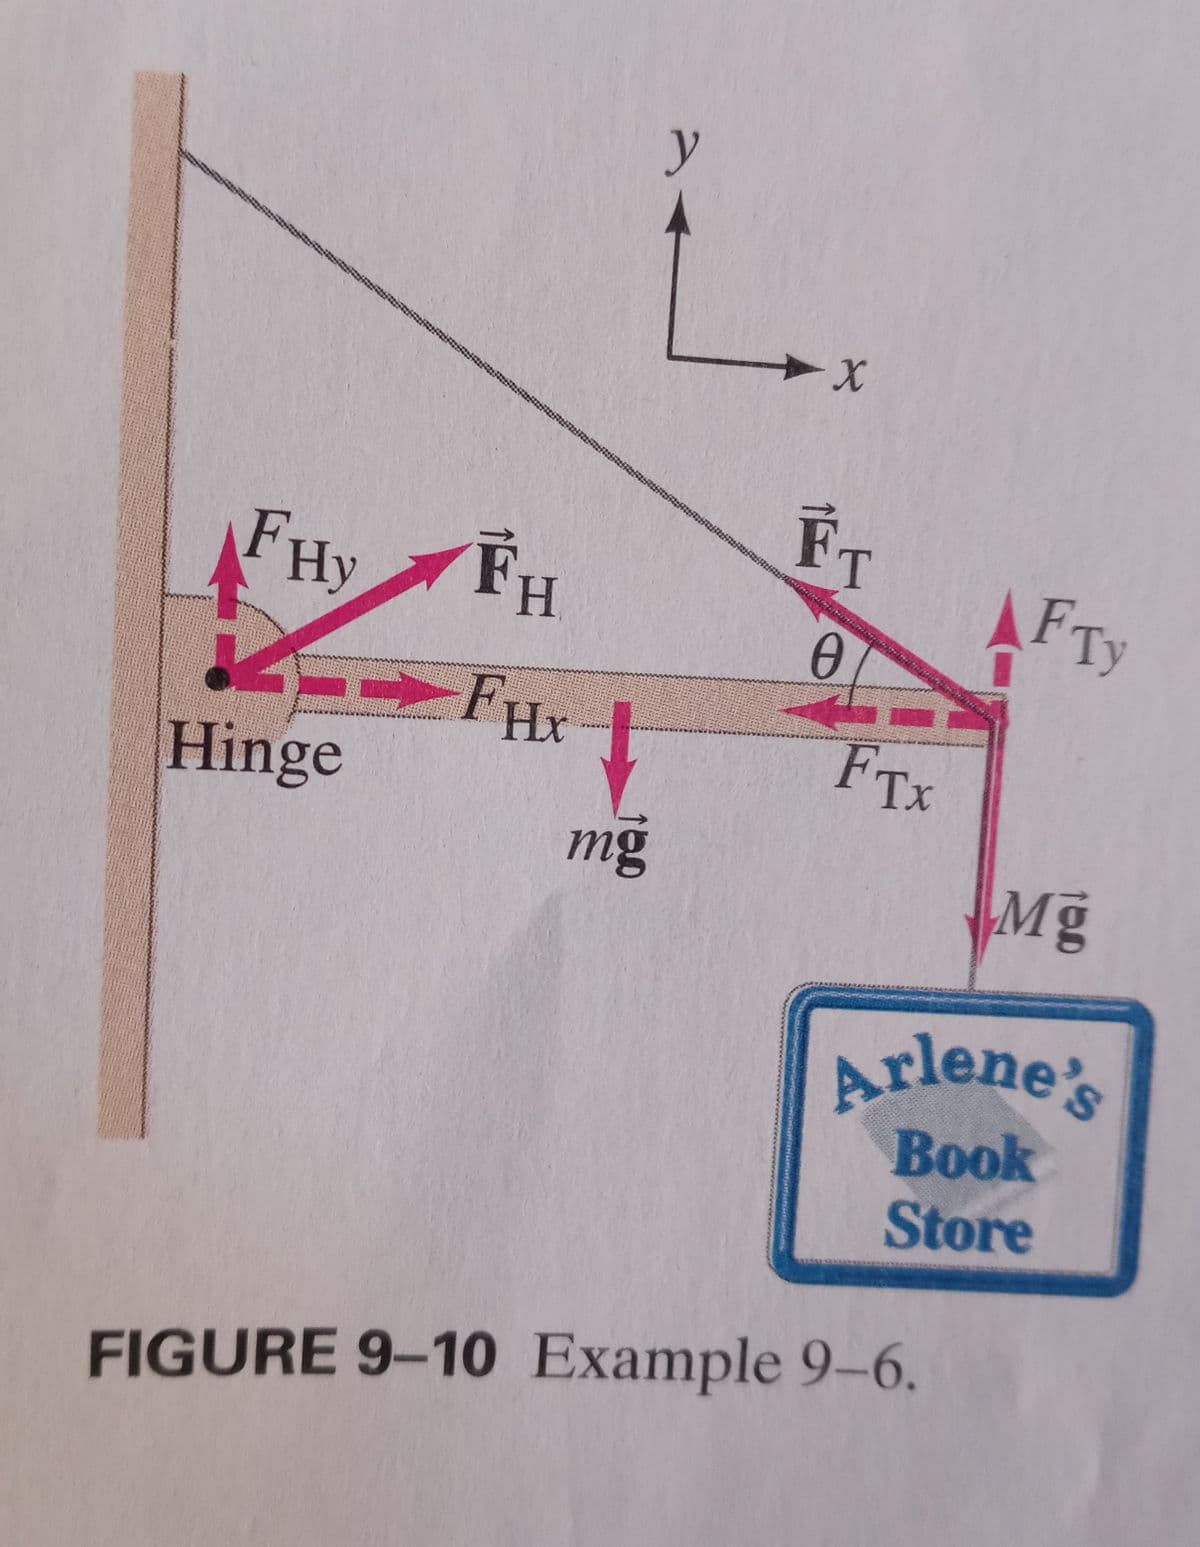 FHy FH
4
Hinge
▶FHx
mg
y
X
FT
0
FTX
AFTY
Mg
Arlene's
Book
Store
FIGURE 9-10 Example 9-6.